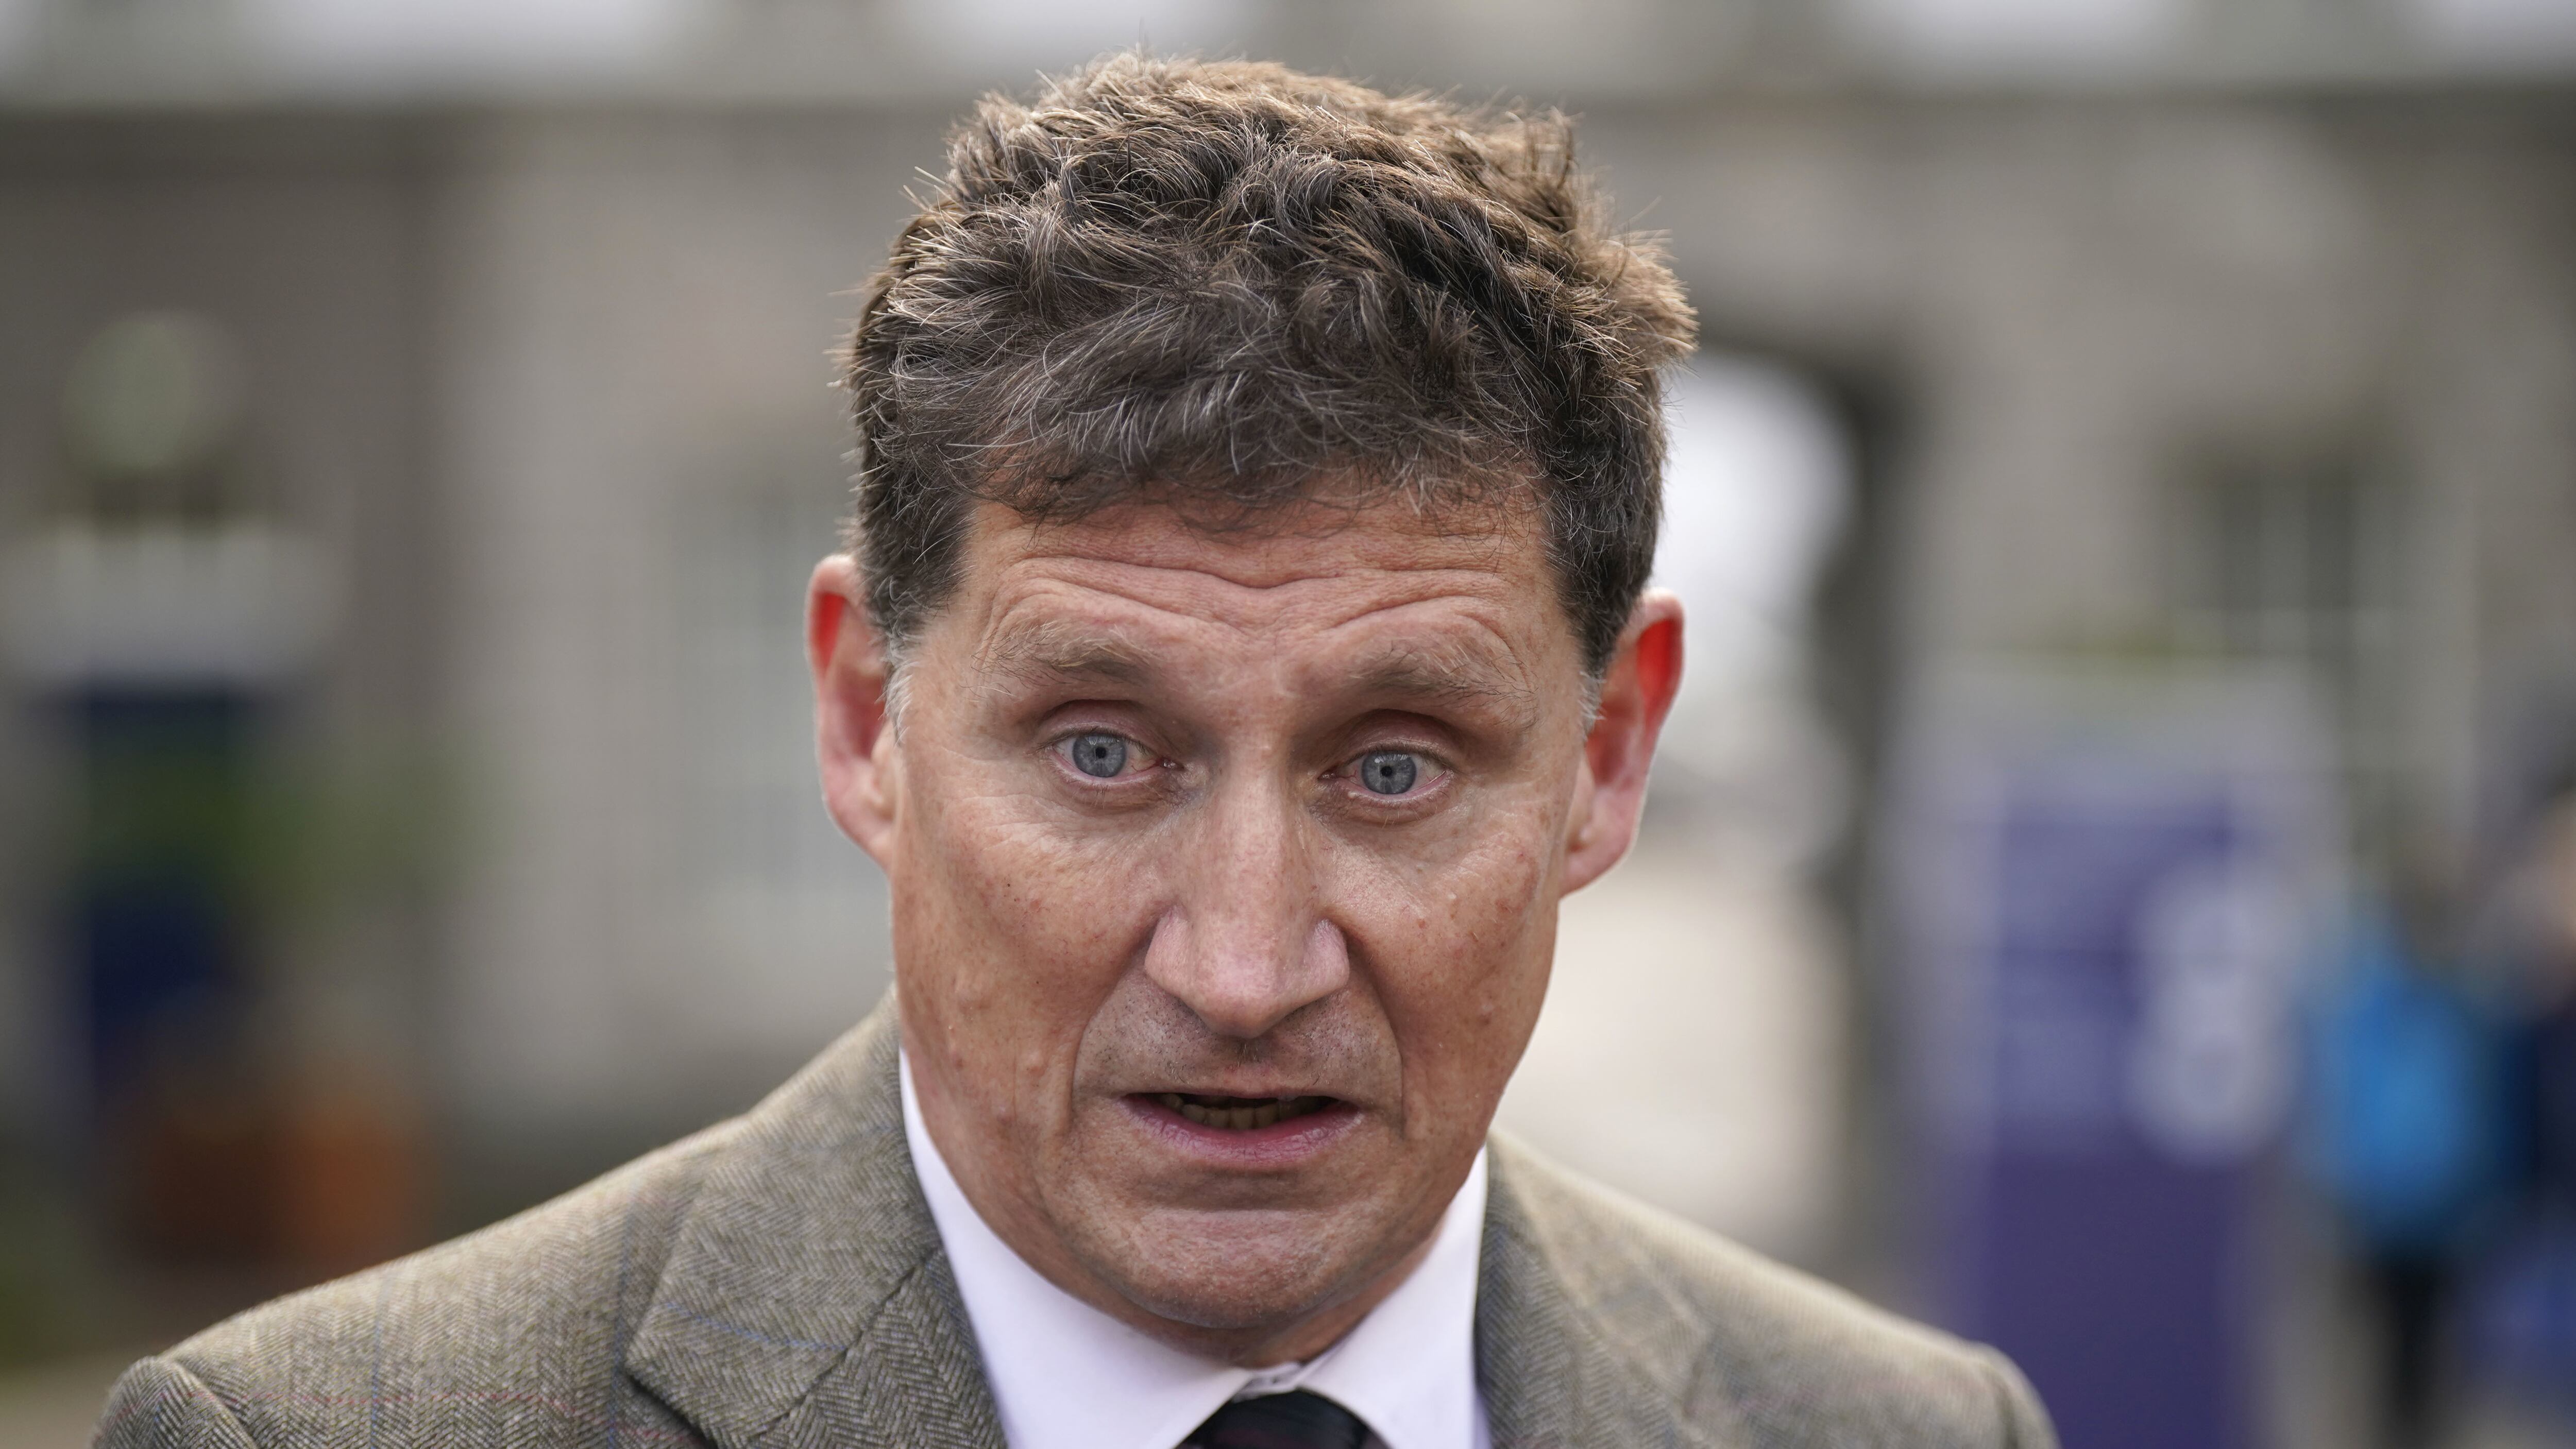 Irish transport minister Eamon Ryan has said the deal struck at the Cop28 climate conference to ‘transition away’ from fossil fuels is ‘historic’